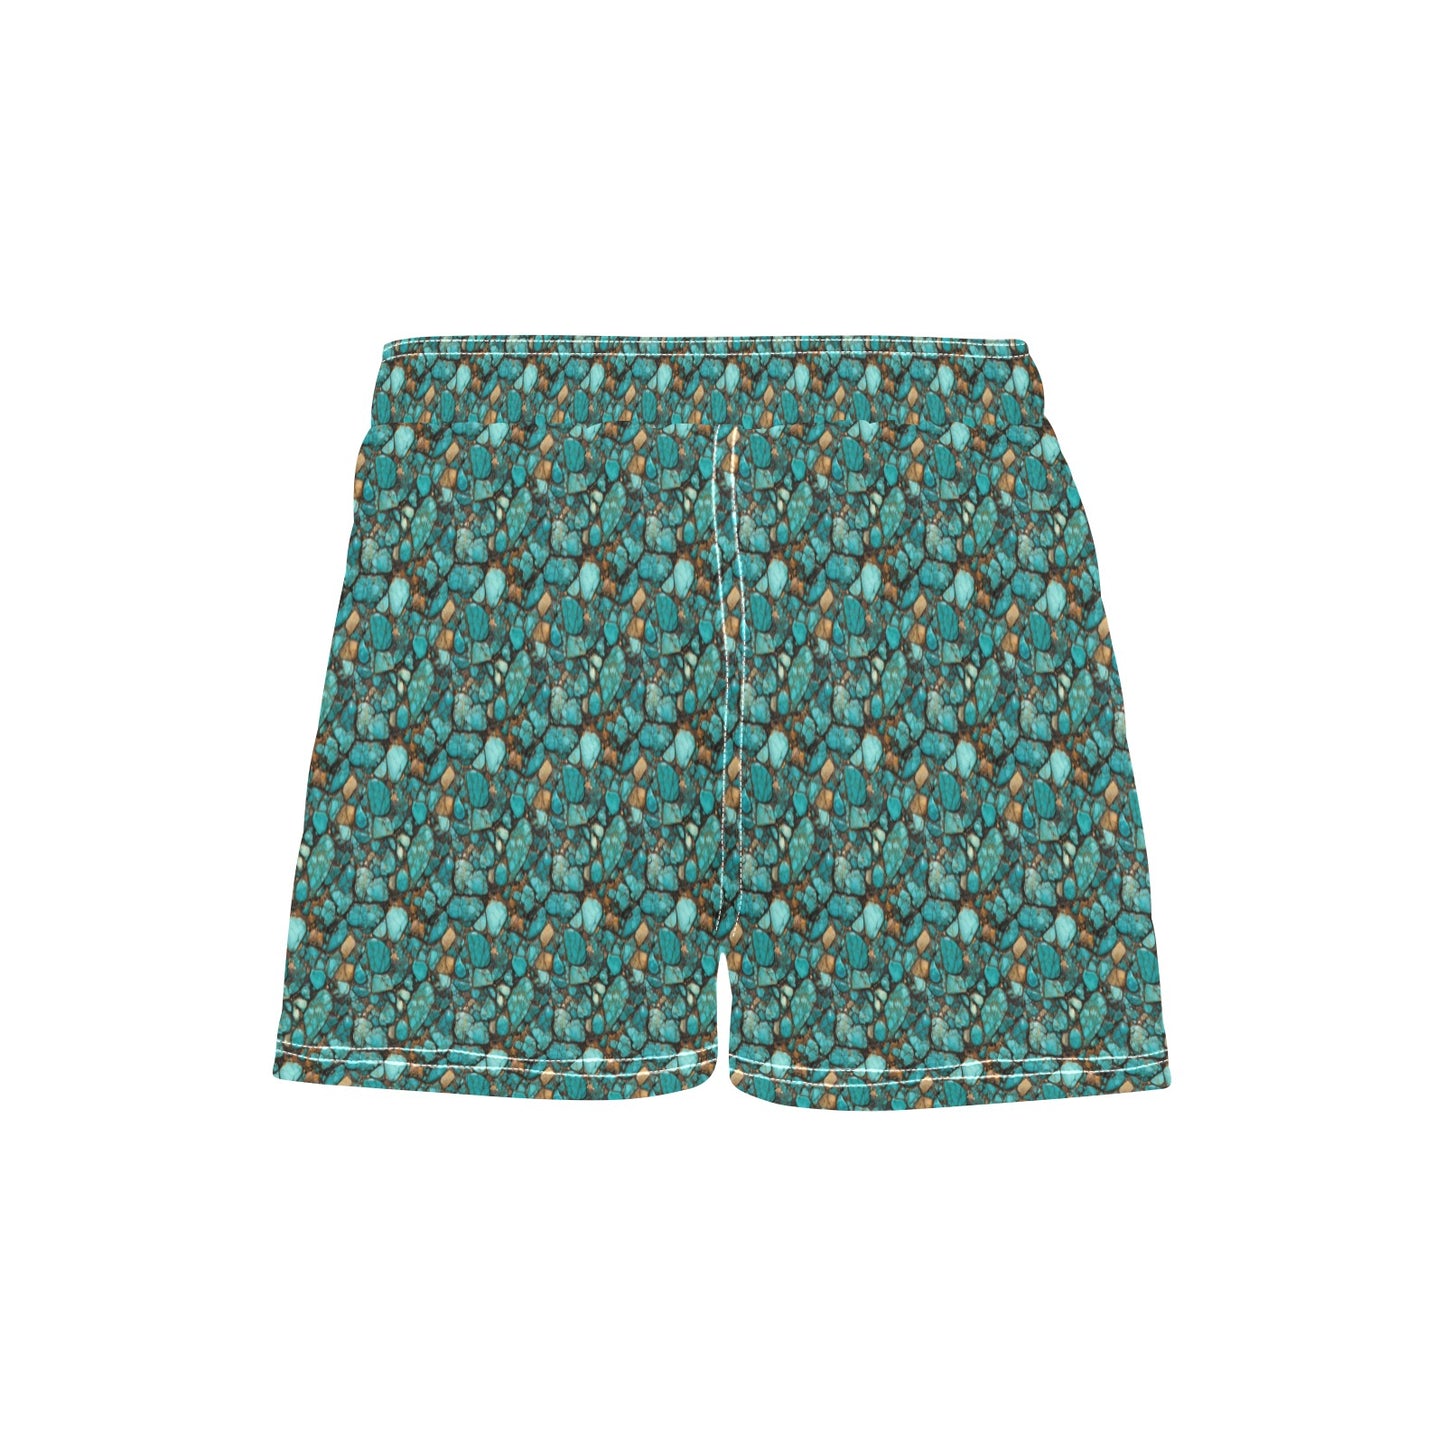 Women's All Turquoise Beach Board Shorts